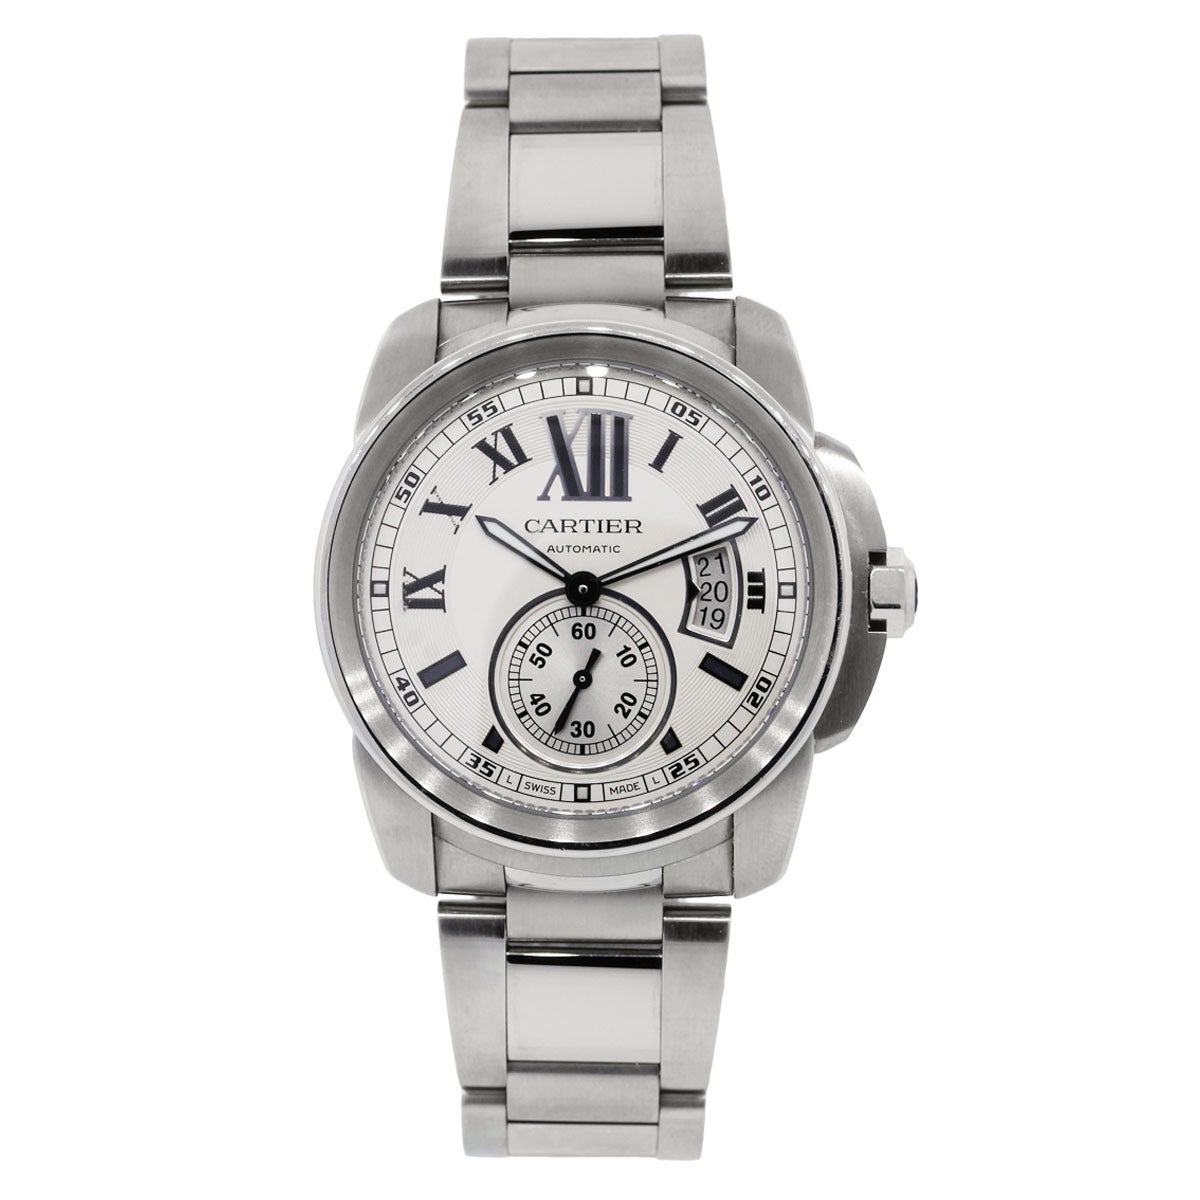 Brand: Cartier
Model: Calibre
Reference: 3389
Case Material: Stainless Steel
Movement: Automatic
Case Measurement: 42mm
Dial: Silvered chronograph dial
Crystal: Scratch Resistant Sapphire
Clasp: Stainless Steel safety clasp
Size: Will Fit a